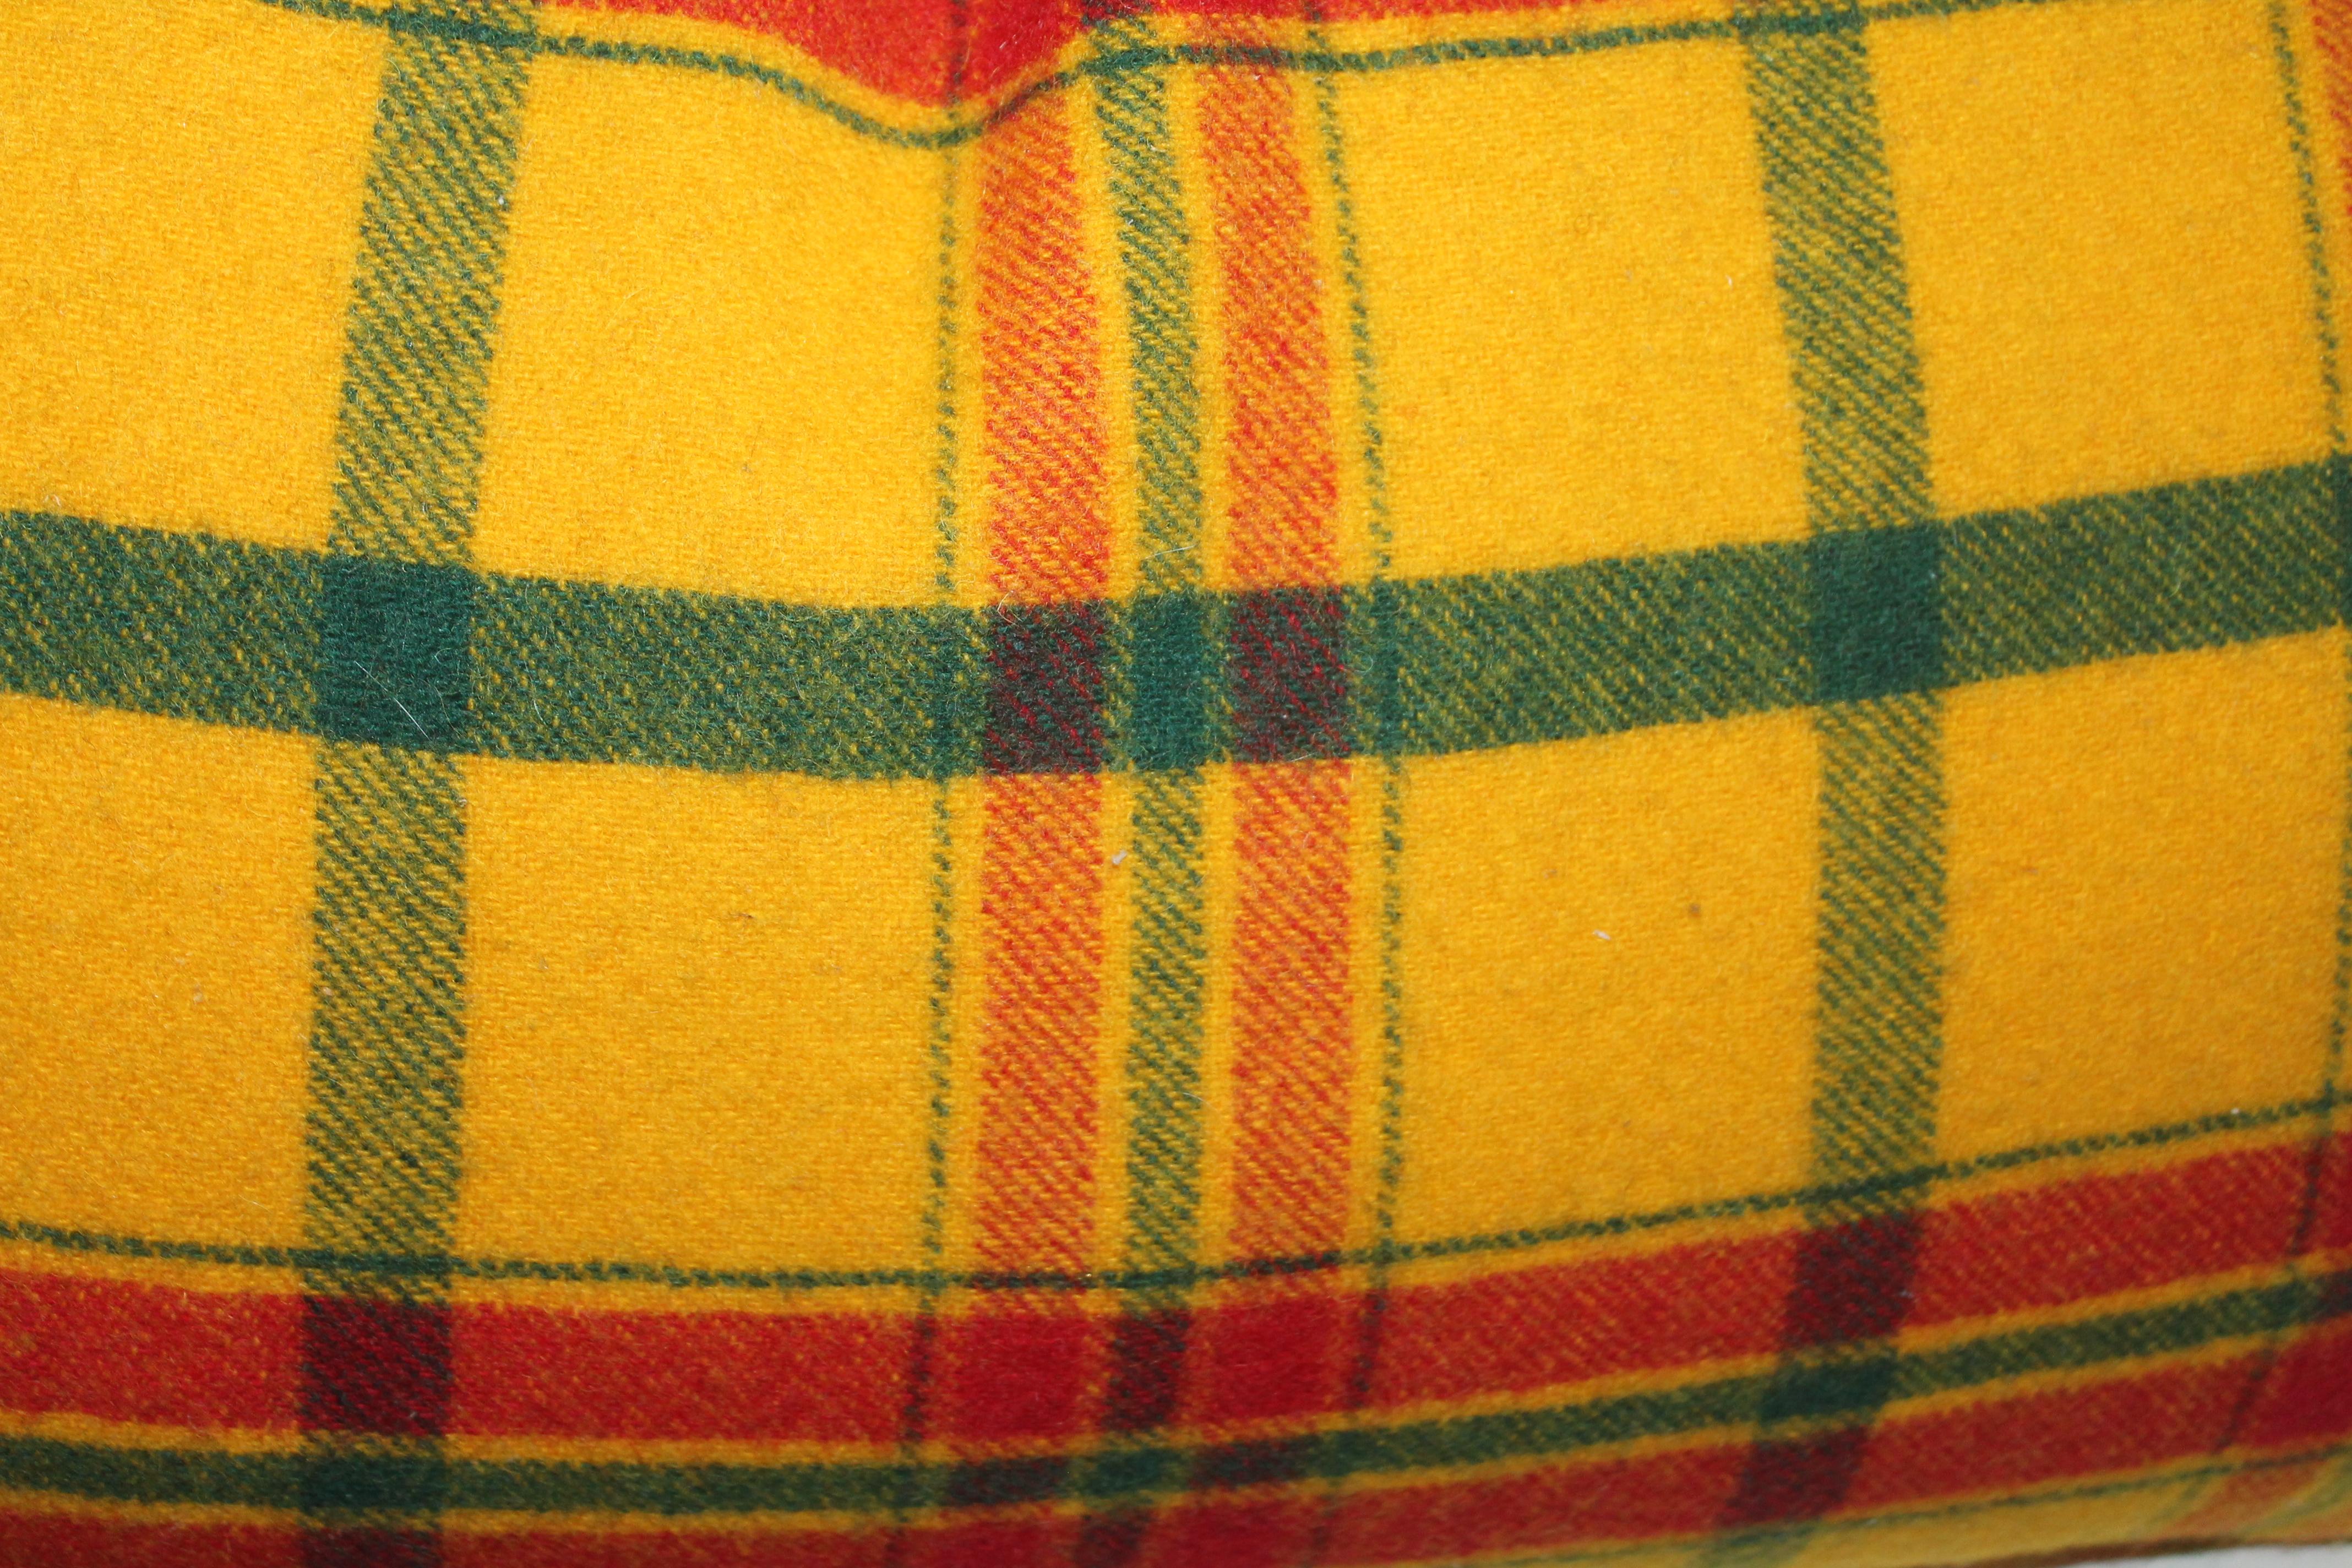 Hand-Crafted Plaid Wool Blanket Pillows, Pair For Sale